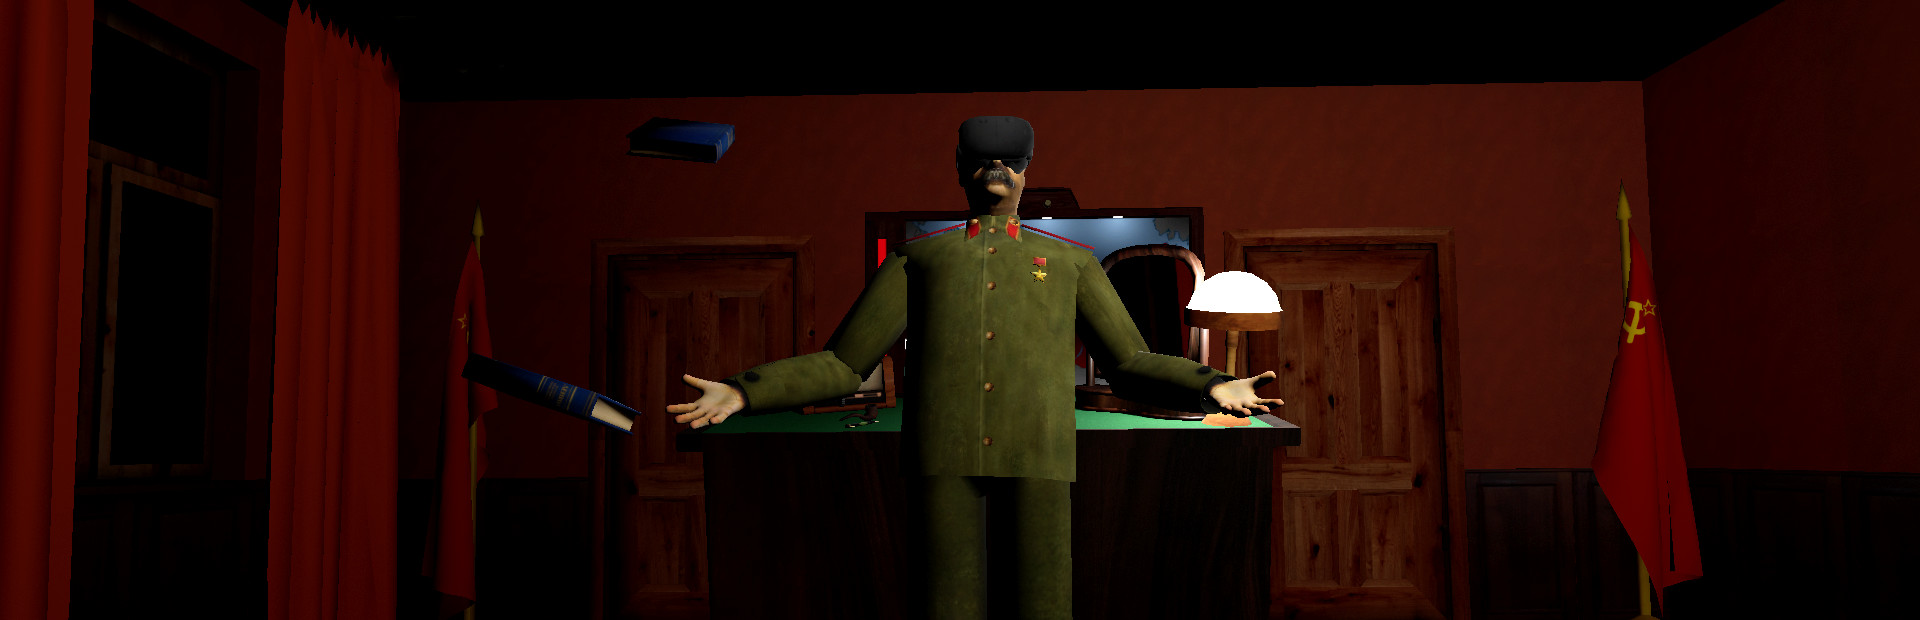 Calm Down, Stalin - VR cover image